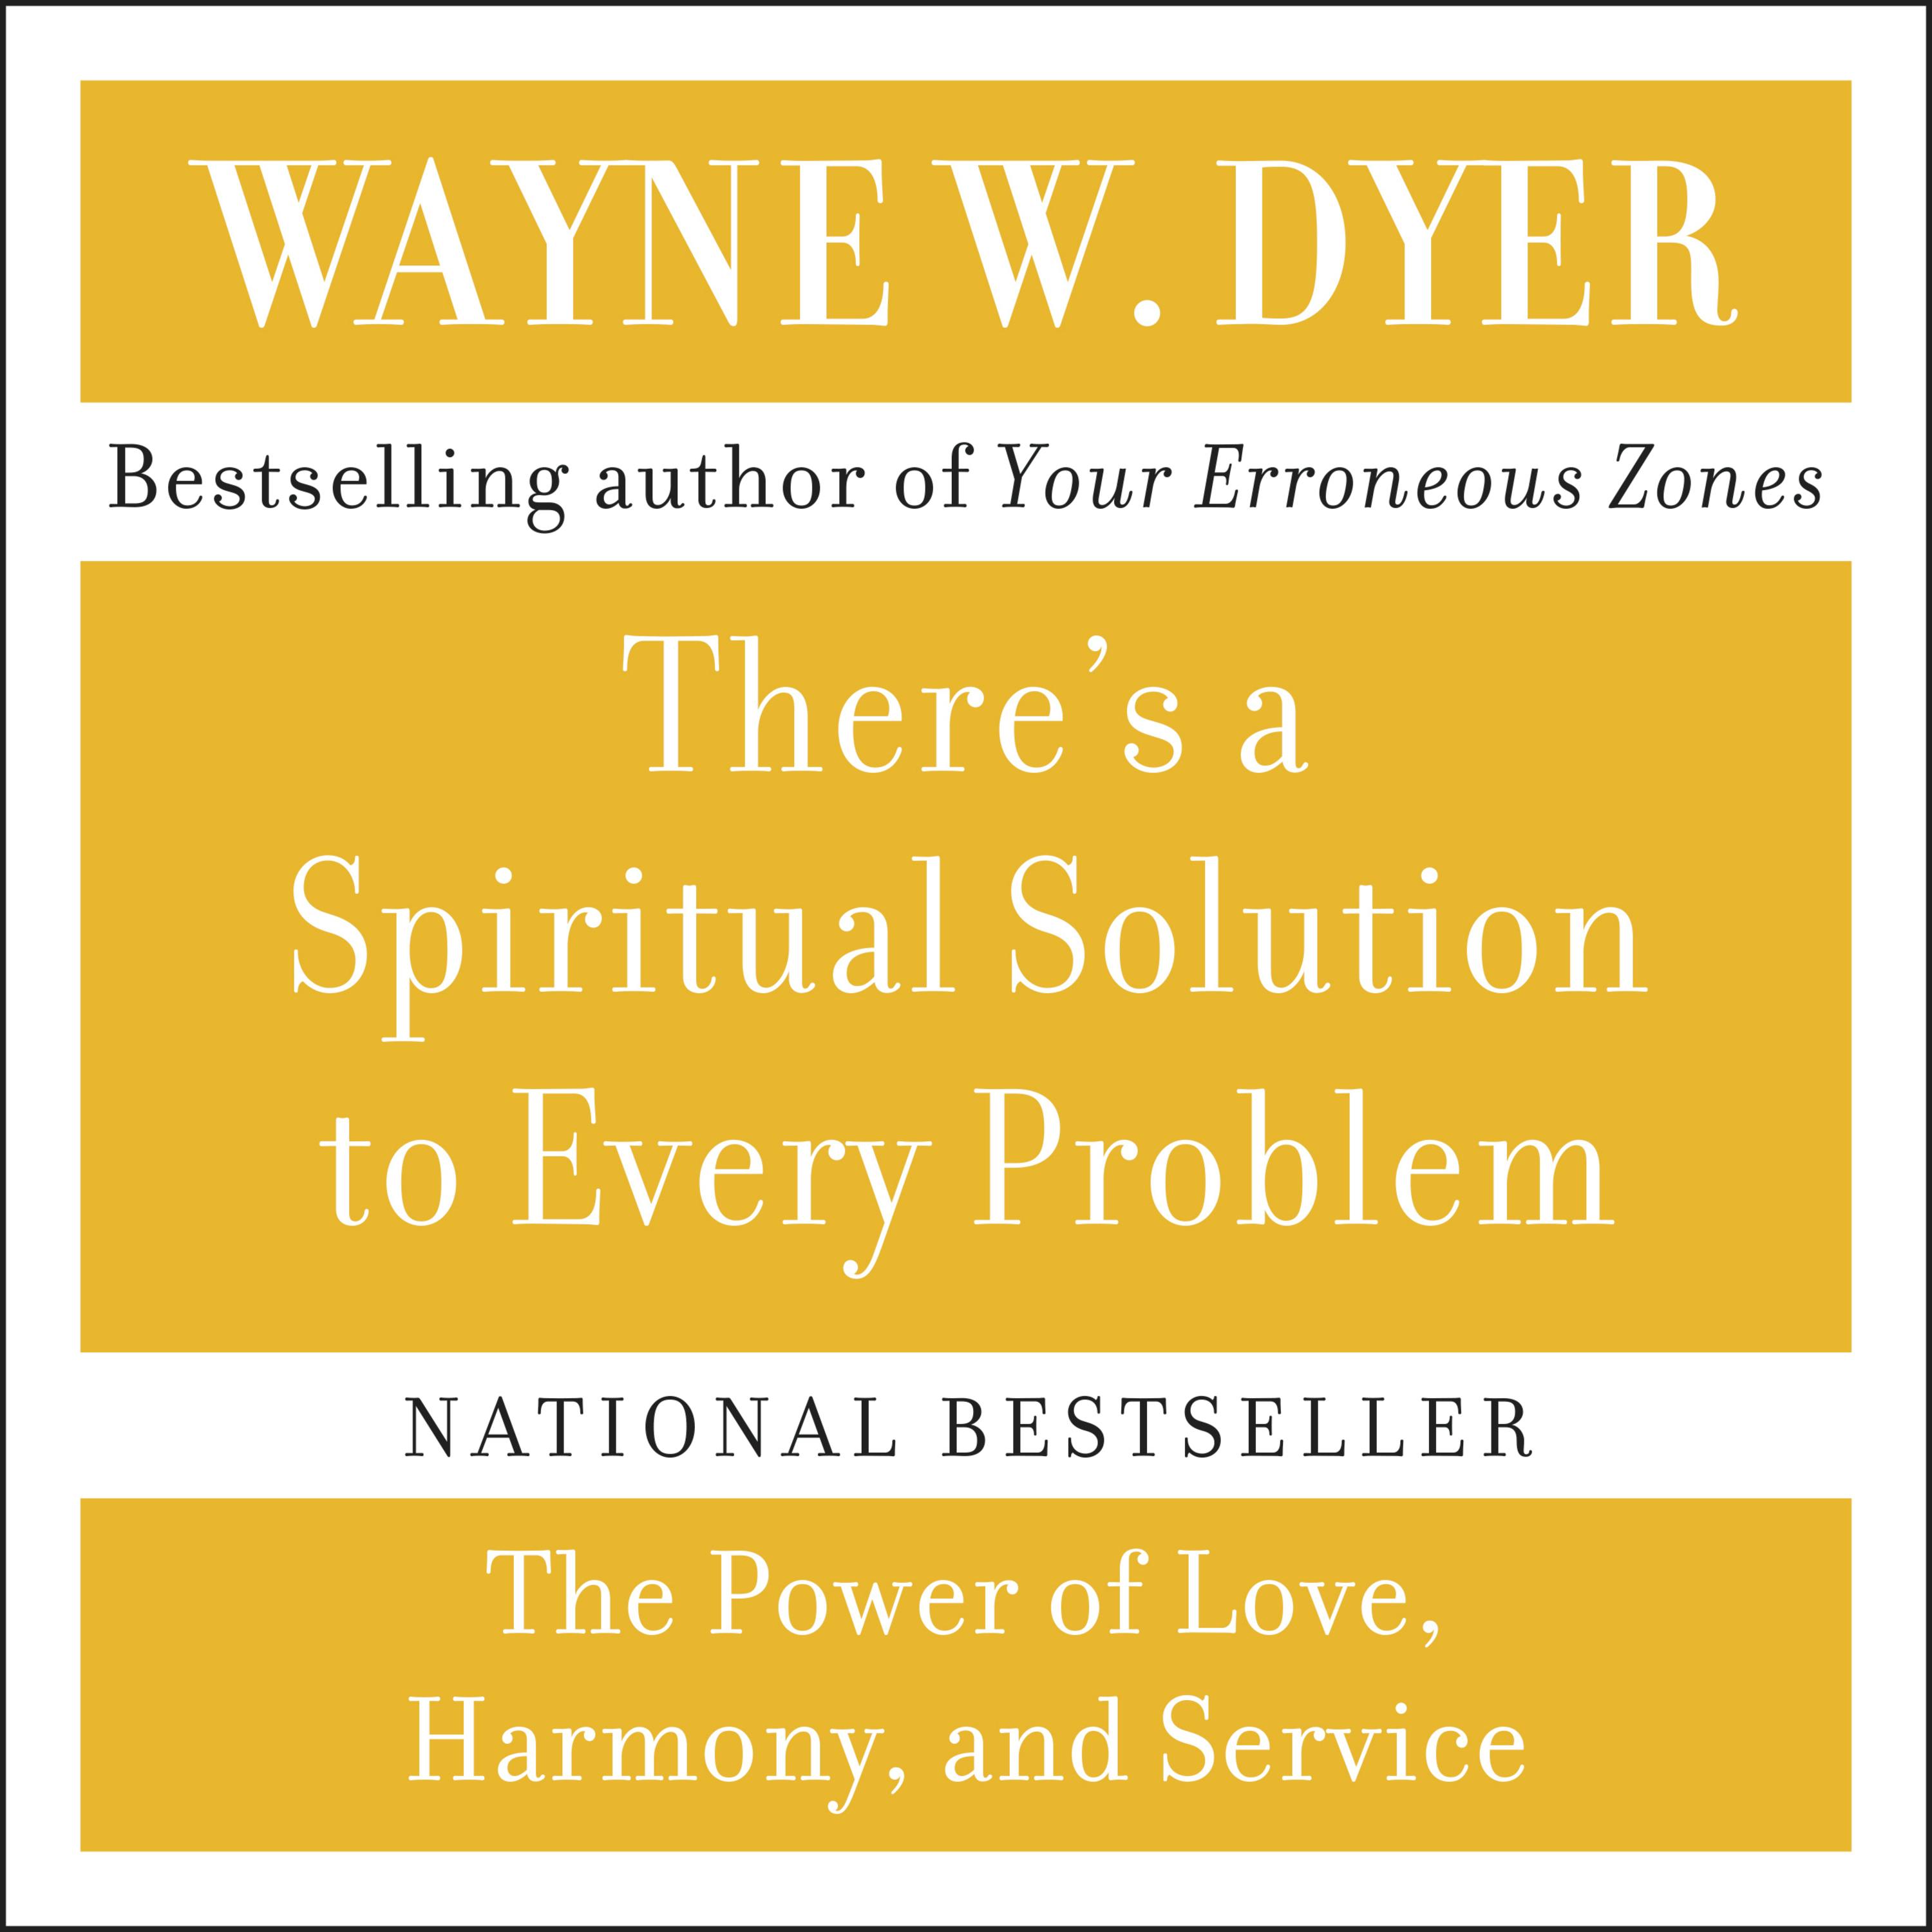 There's A Spiritual Solution to Every Problem - Wayne W. Dyer